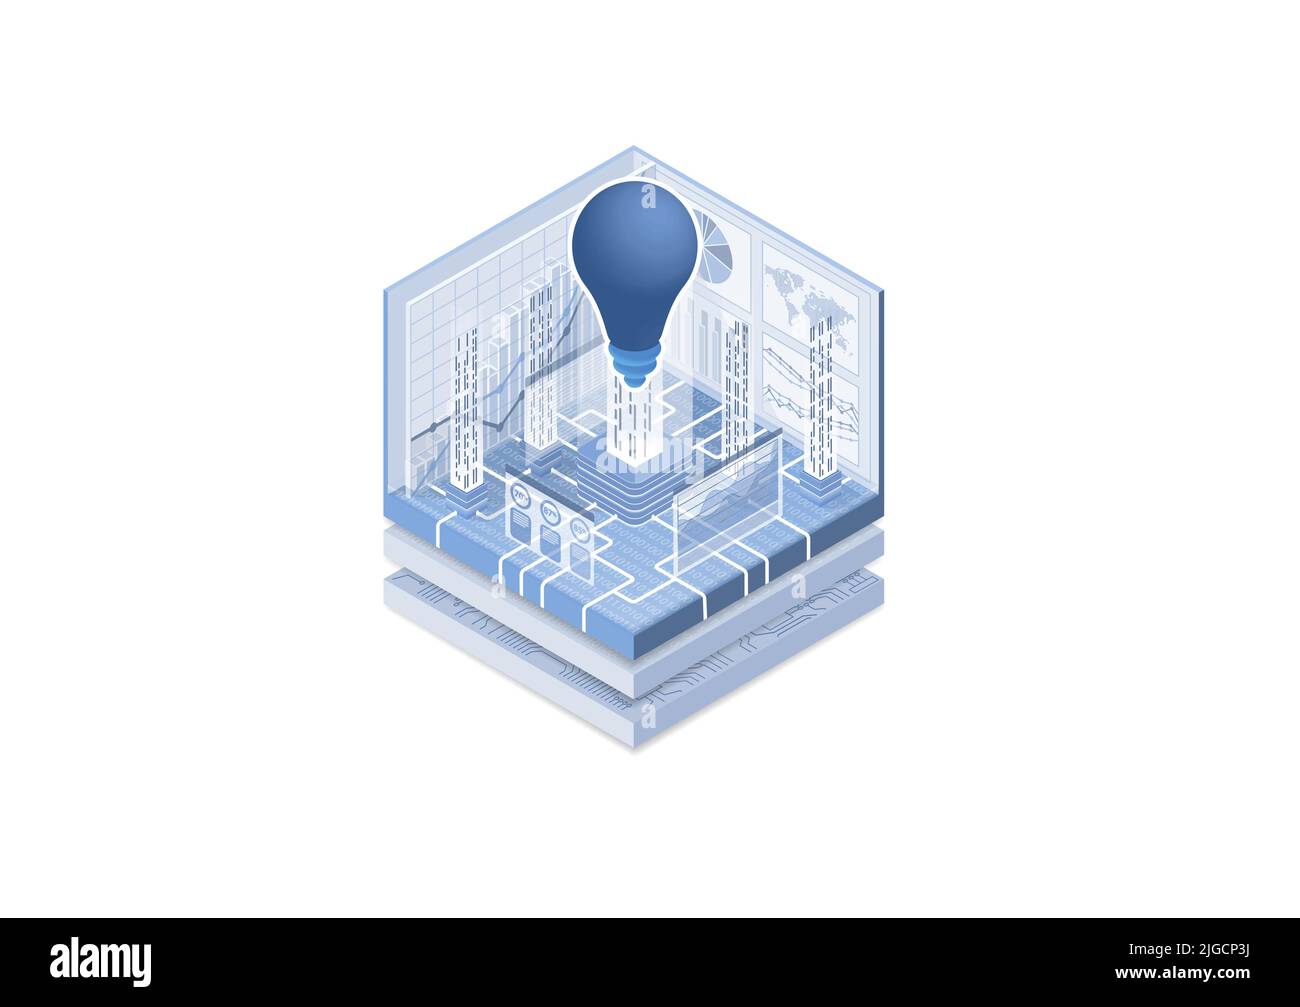 Technology innovation concept. Vector illustration of an isometric cube. Symbol of a light bulb. Ideation of new digitization ideas. Stock Vector